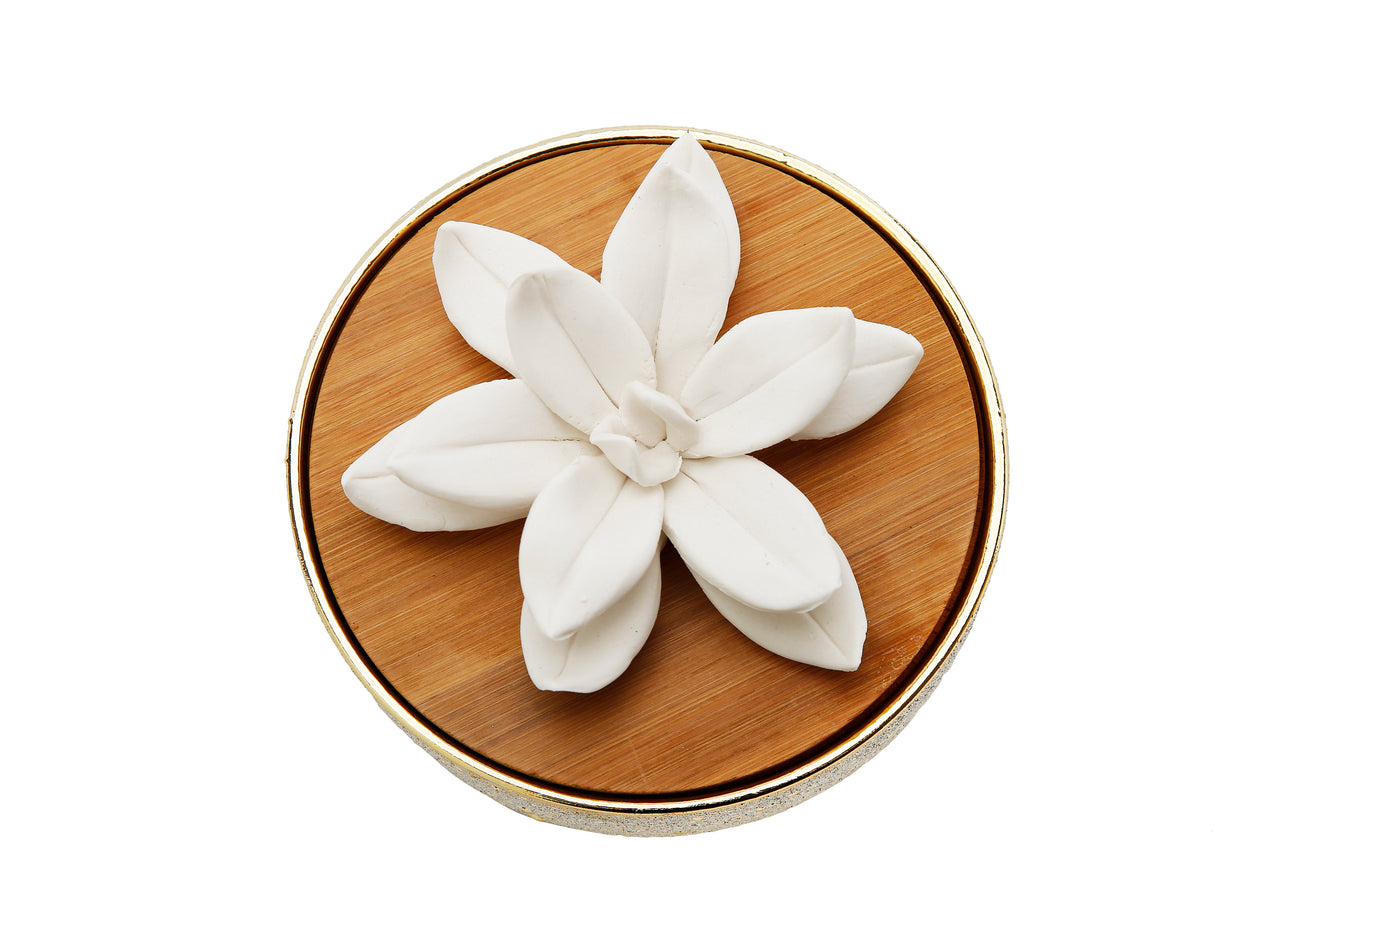 Gold Hemispheric Shaped Diffuser with White Flower, “Lily of the Valley” aroma